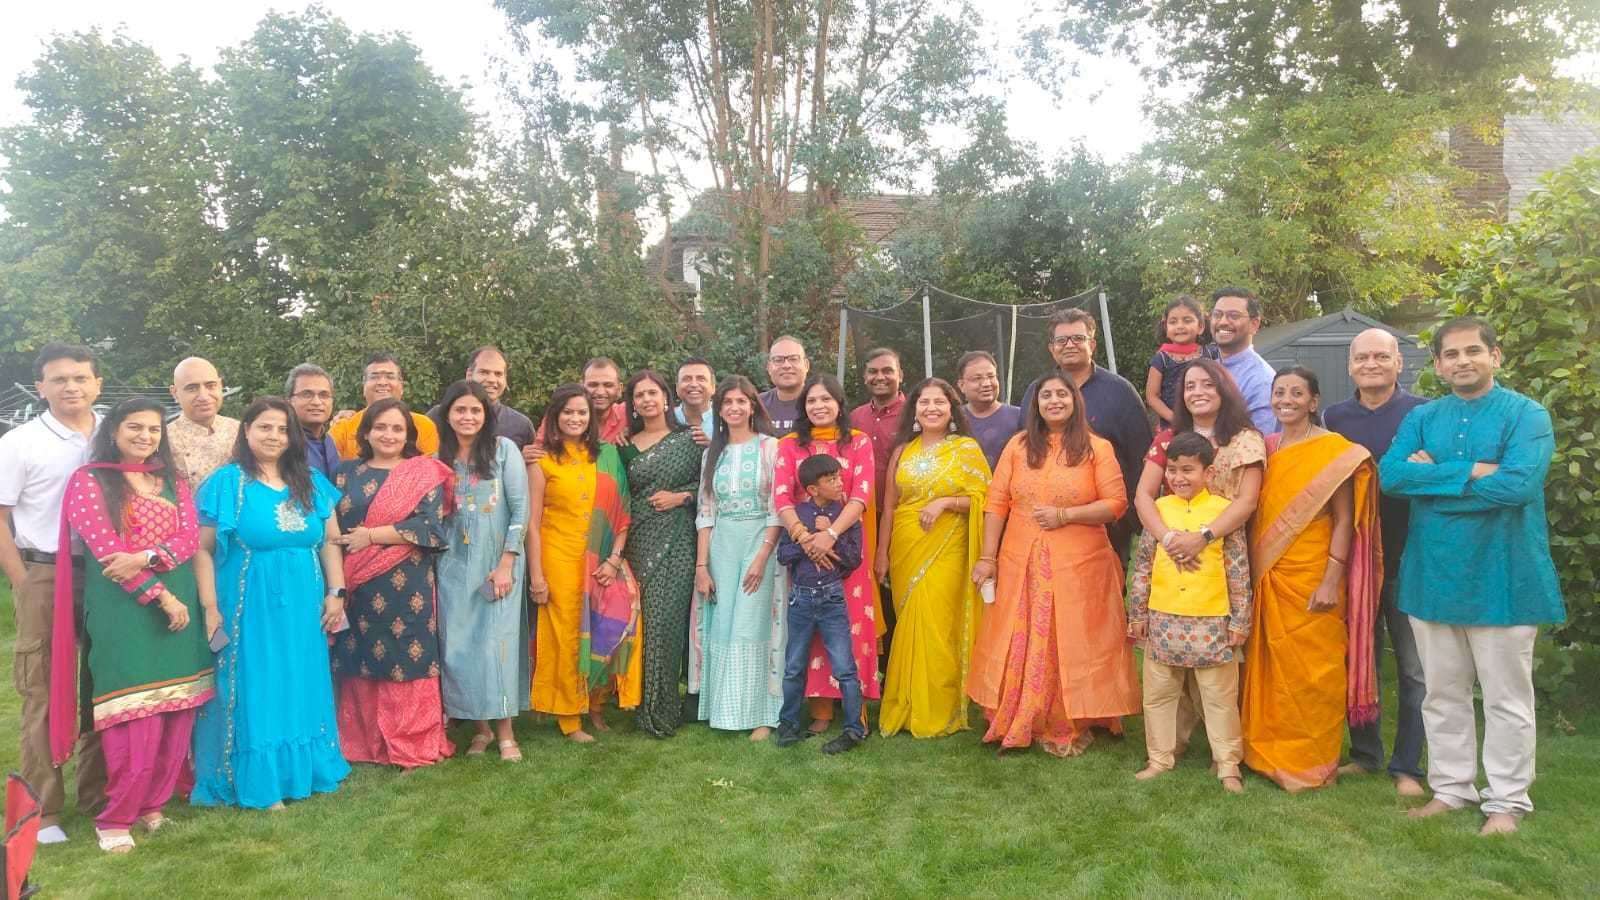 The festival of Ganesh Utsav in Tunbridge Wells. Saloni Shuklar is third from the left, and her husband is behind and to the left in blue